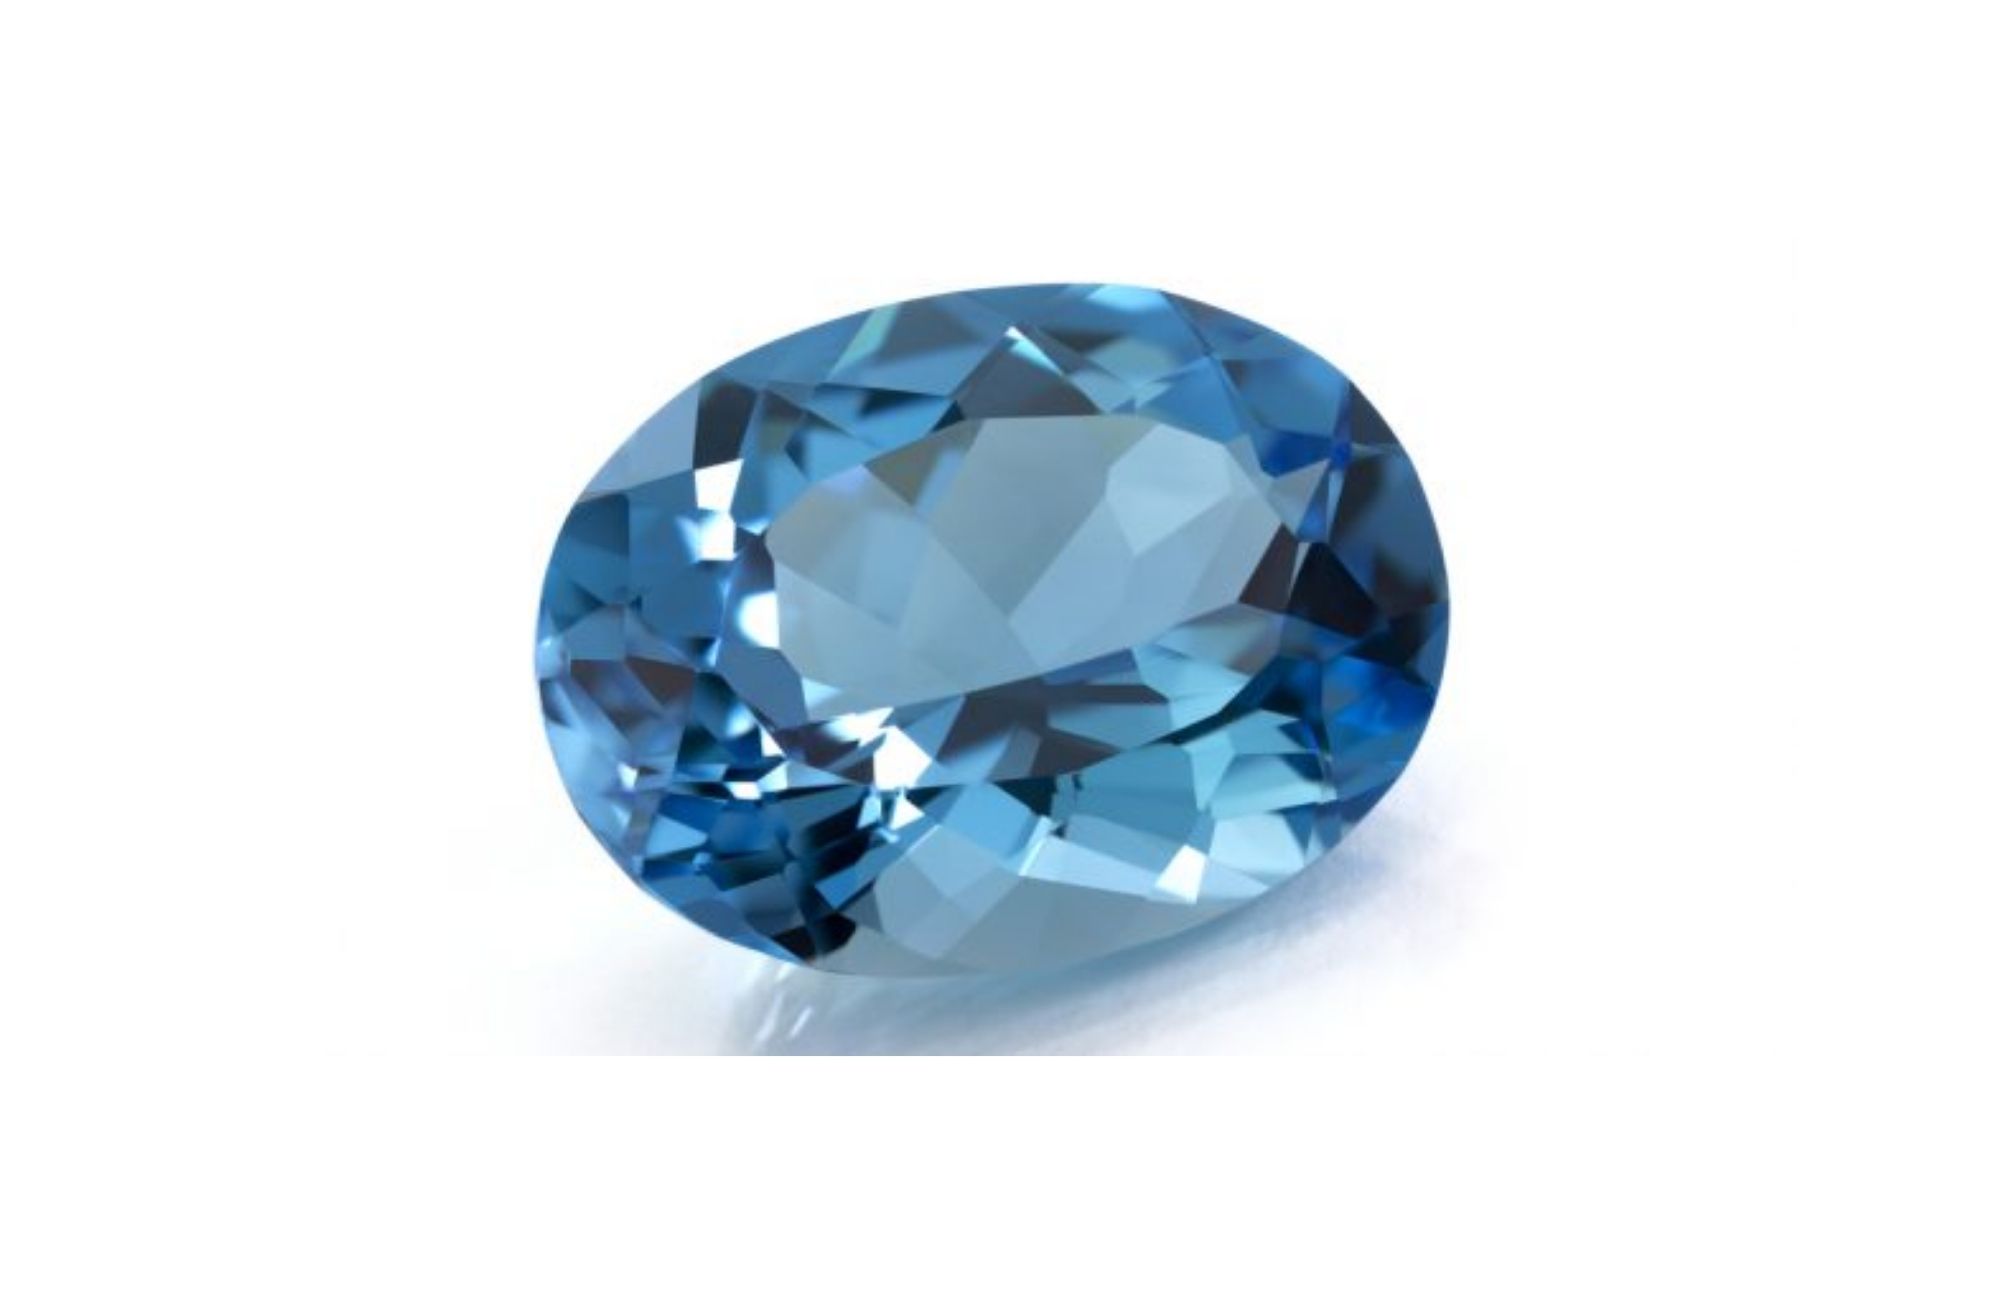 The smooth blue aquamarine on a white background